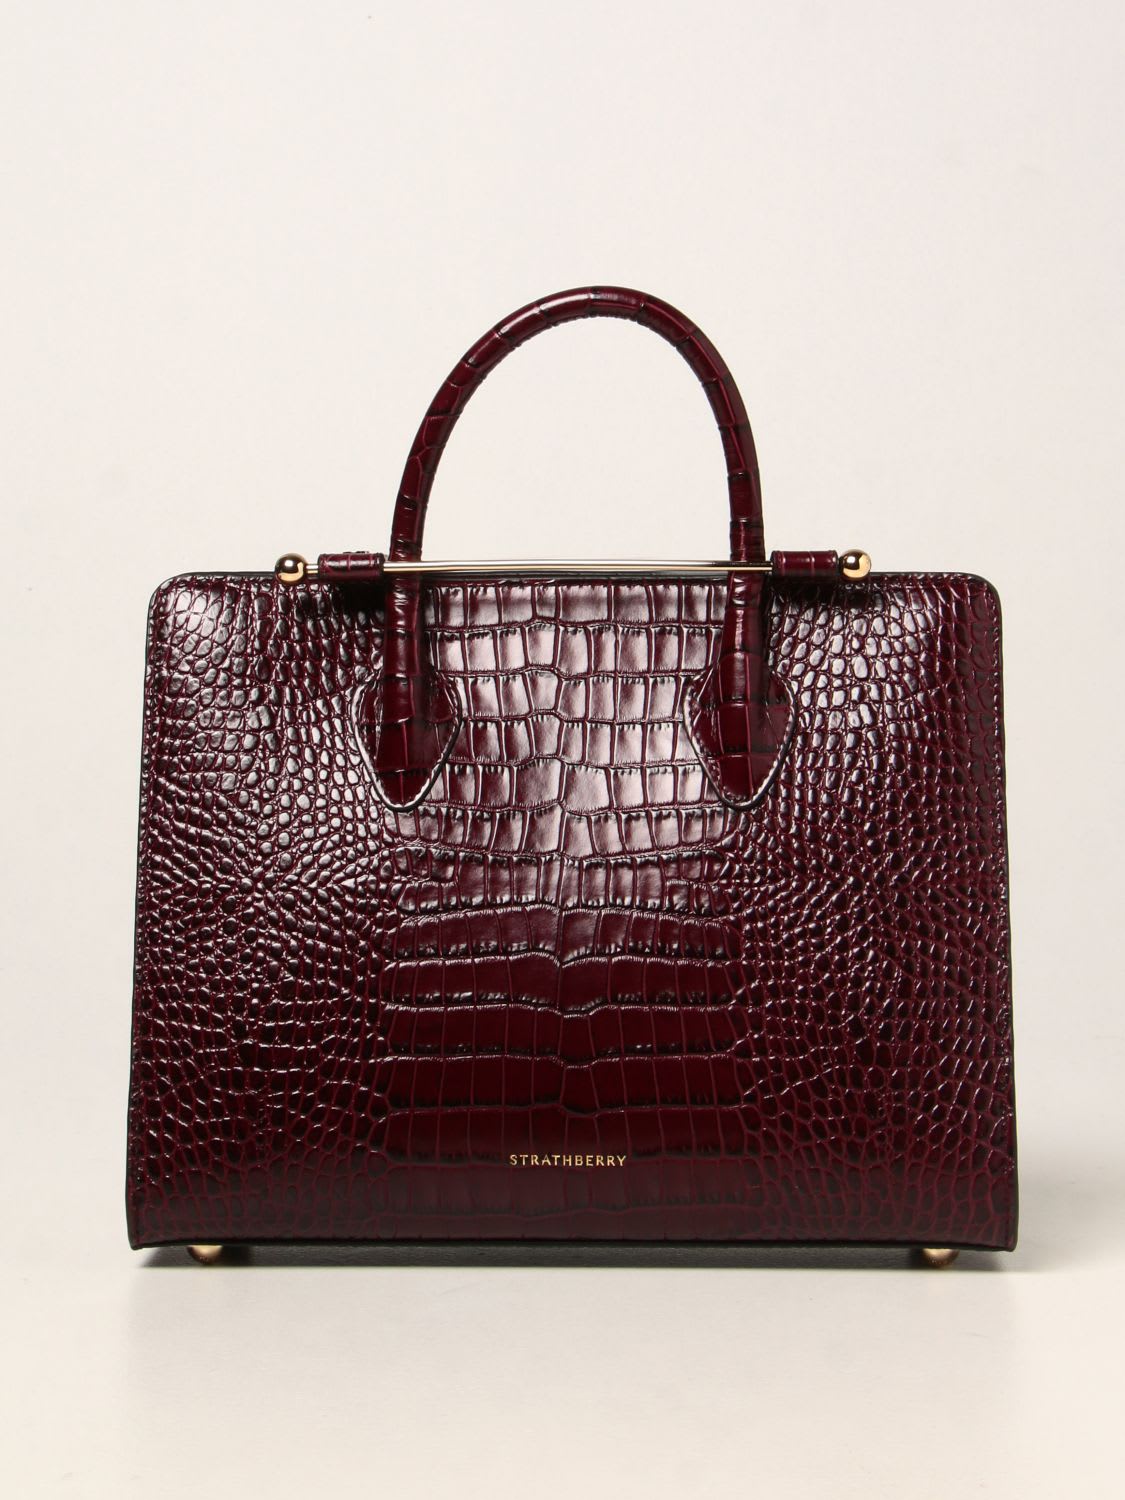 Strathberry Tote Bags Strathberry Midi Tote Bag In Crocodile Print Leather